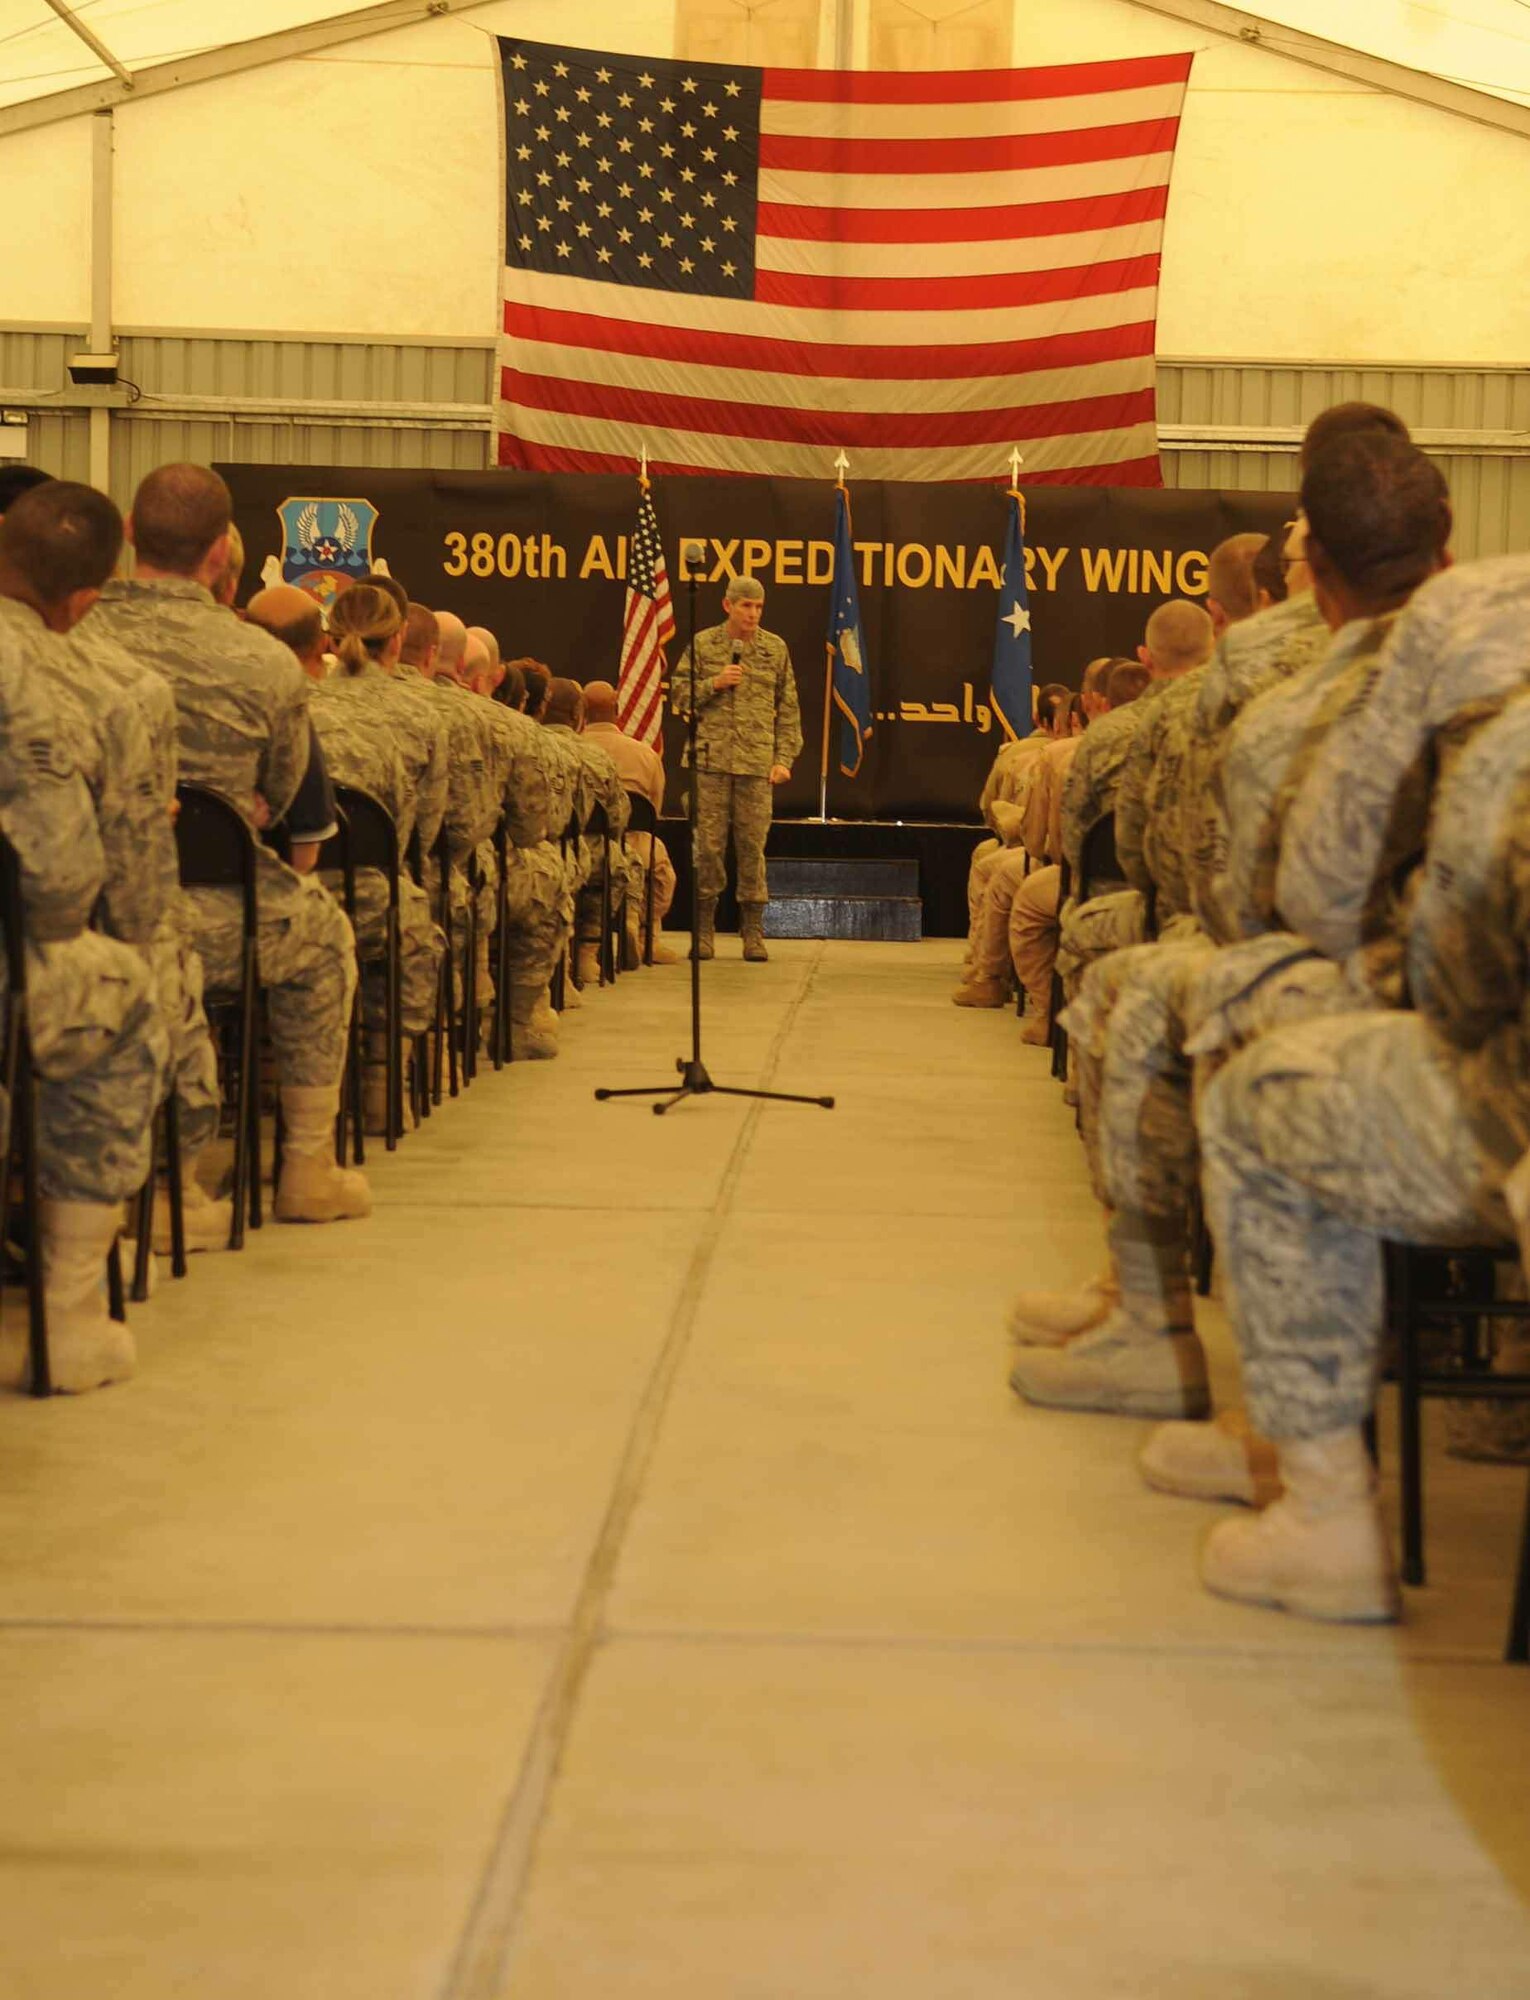 Air Force Chief of Staff Gen. Norton Schwartz speaks to Airmen of the 380th Air Expeditionary Wing Nov. 13, 2009, at an air base in Southwest Asia. (U.S. Air Force photo)